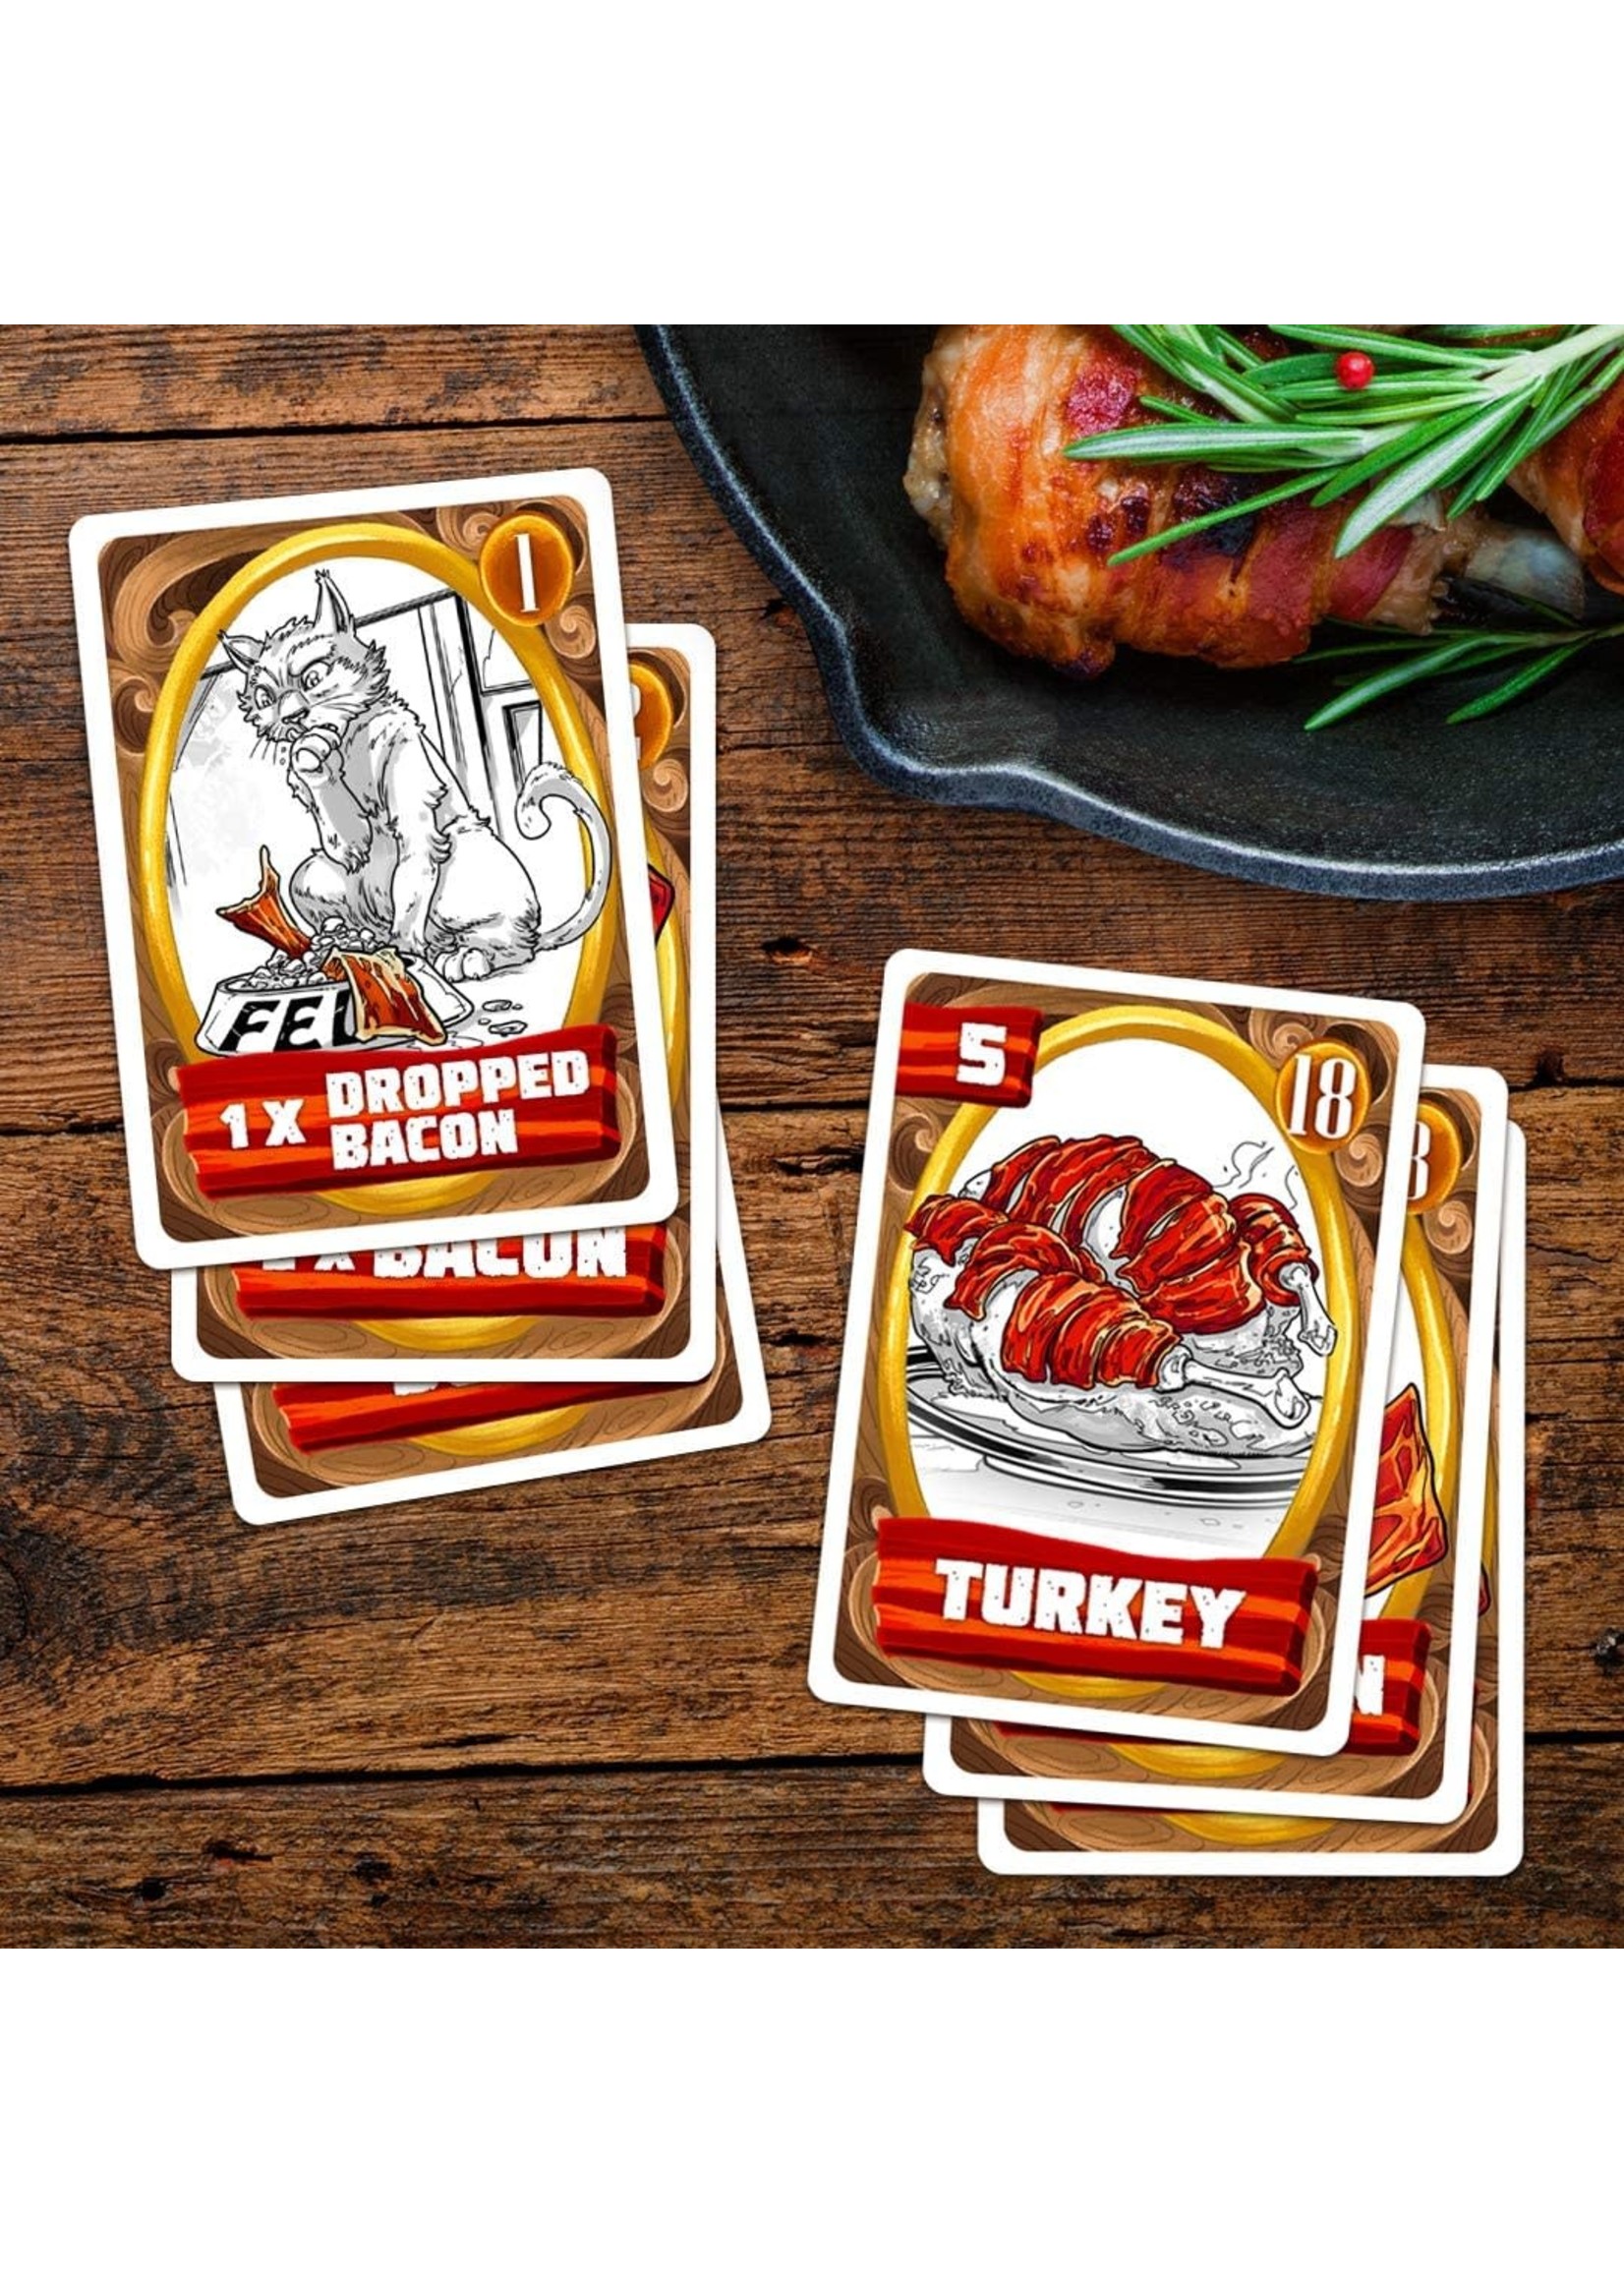 TH3RDWORLD BACON!!! THE CARD GAME